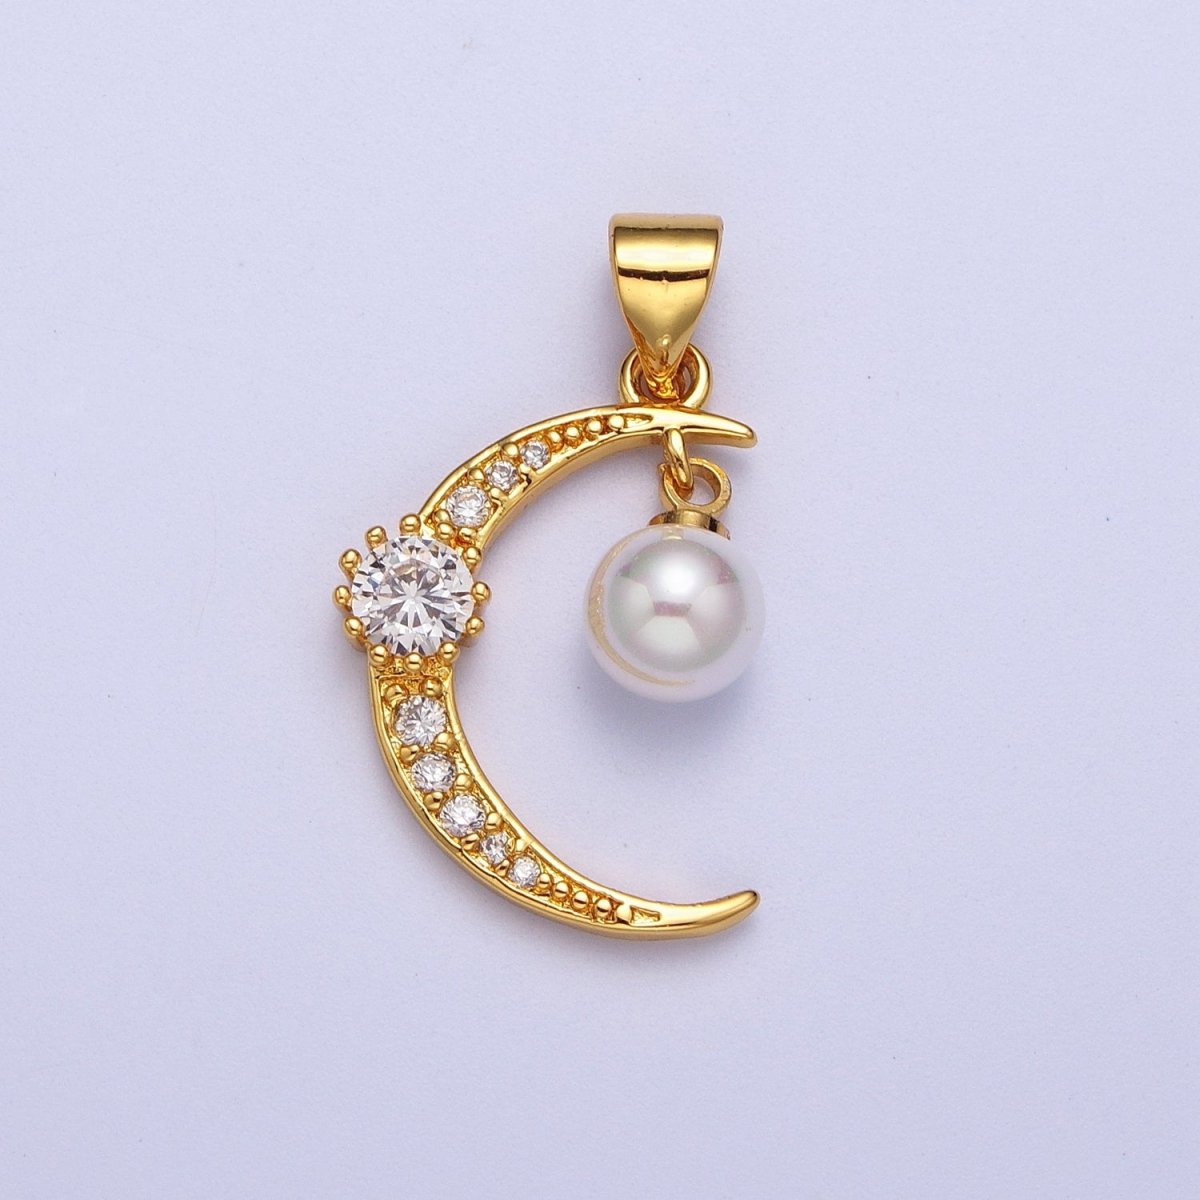 Dainty Gold Crescent Moon Charm with Pearl for Necklace Pendant X-697 - DLUXCA